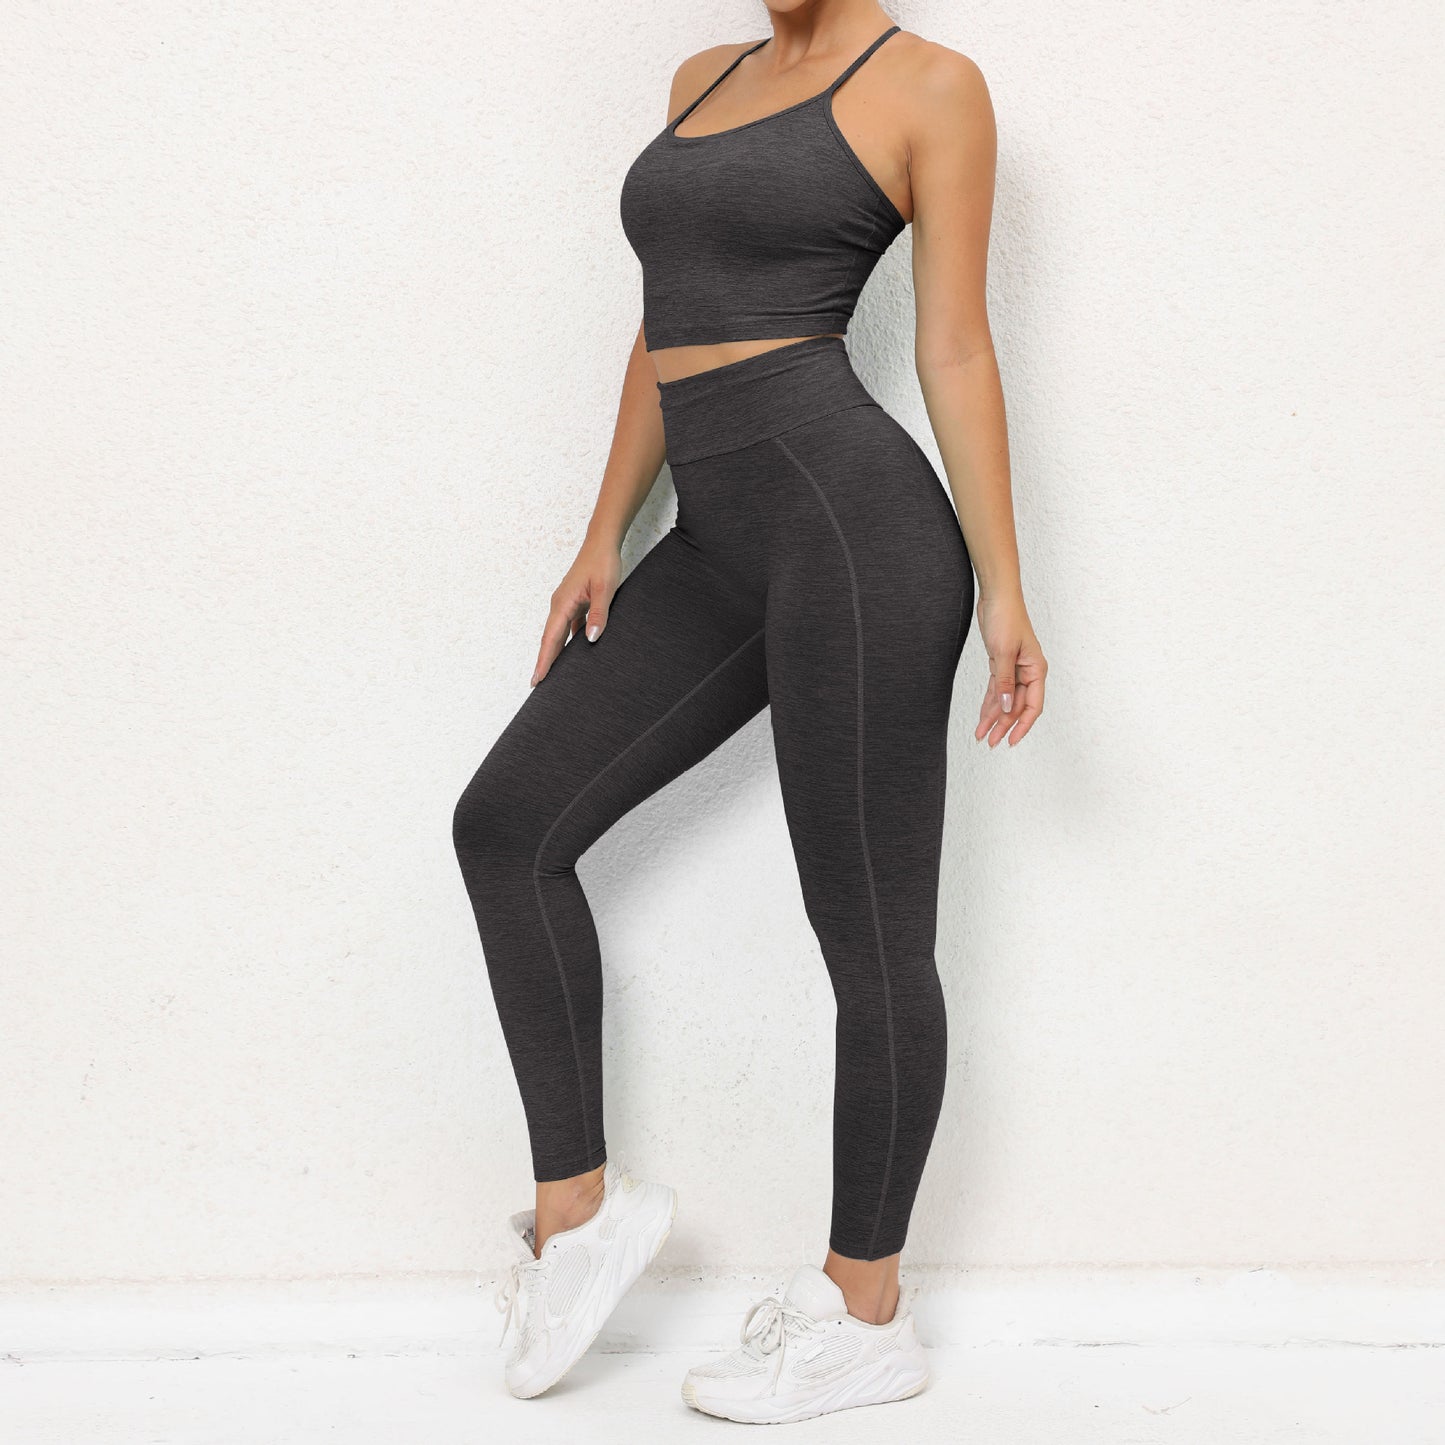 Sexy High Waist Yoga Suits for Women